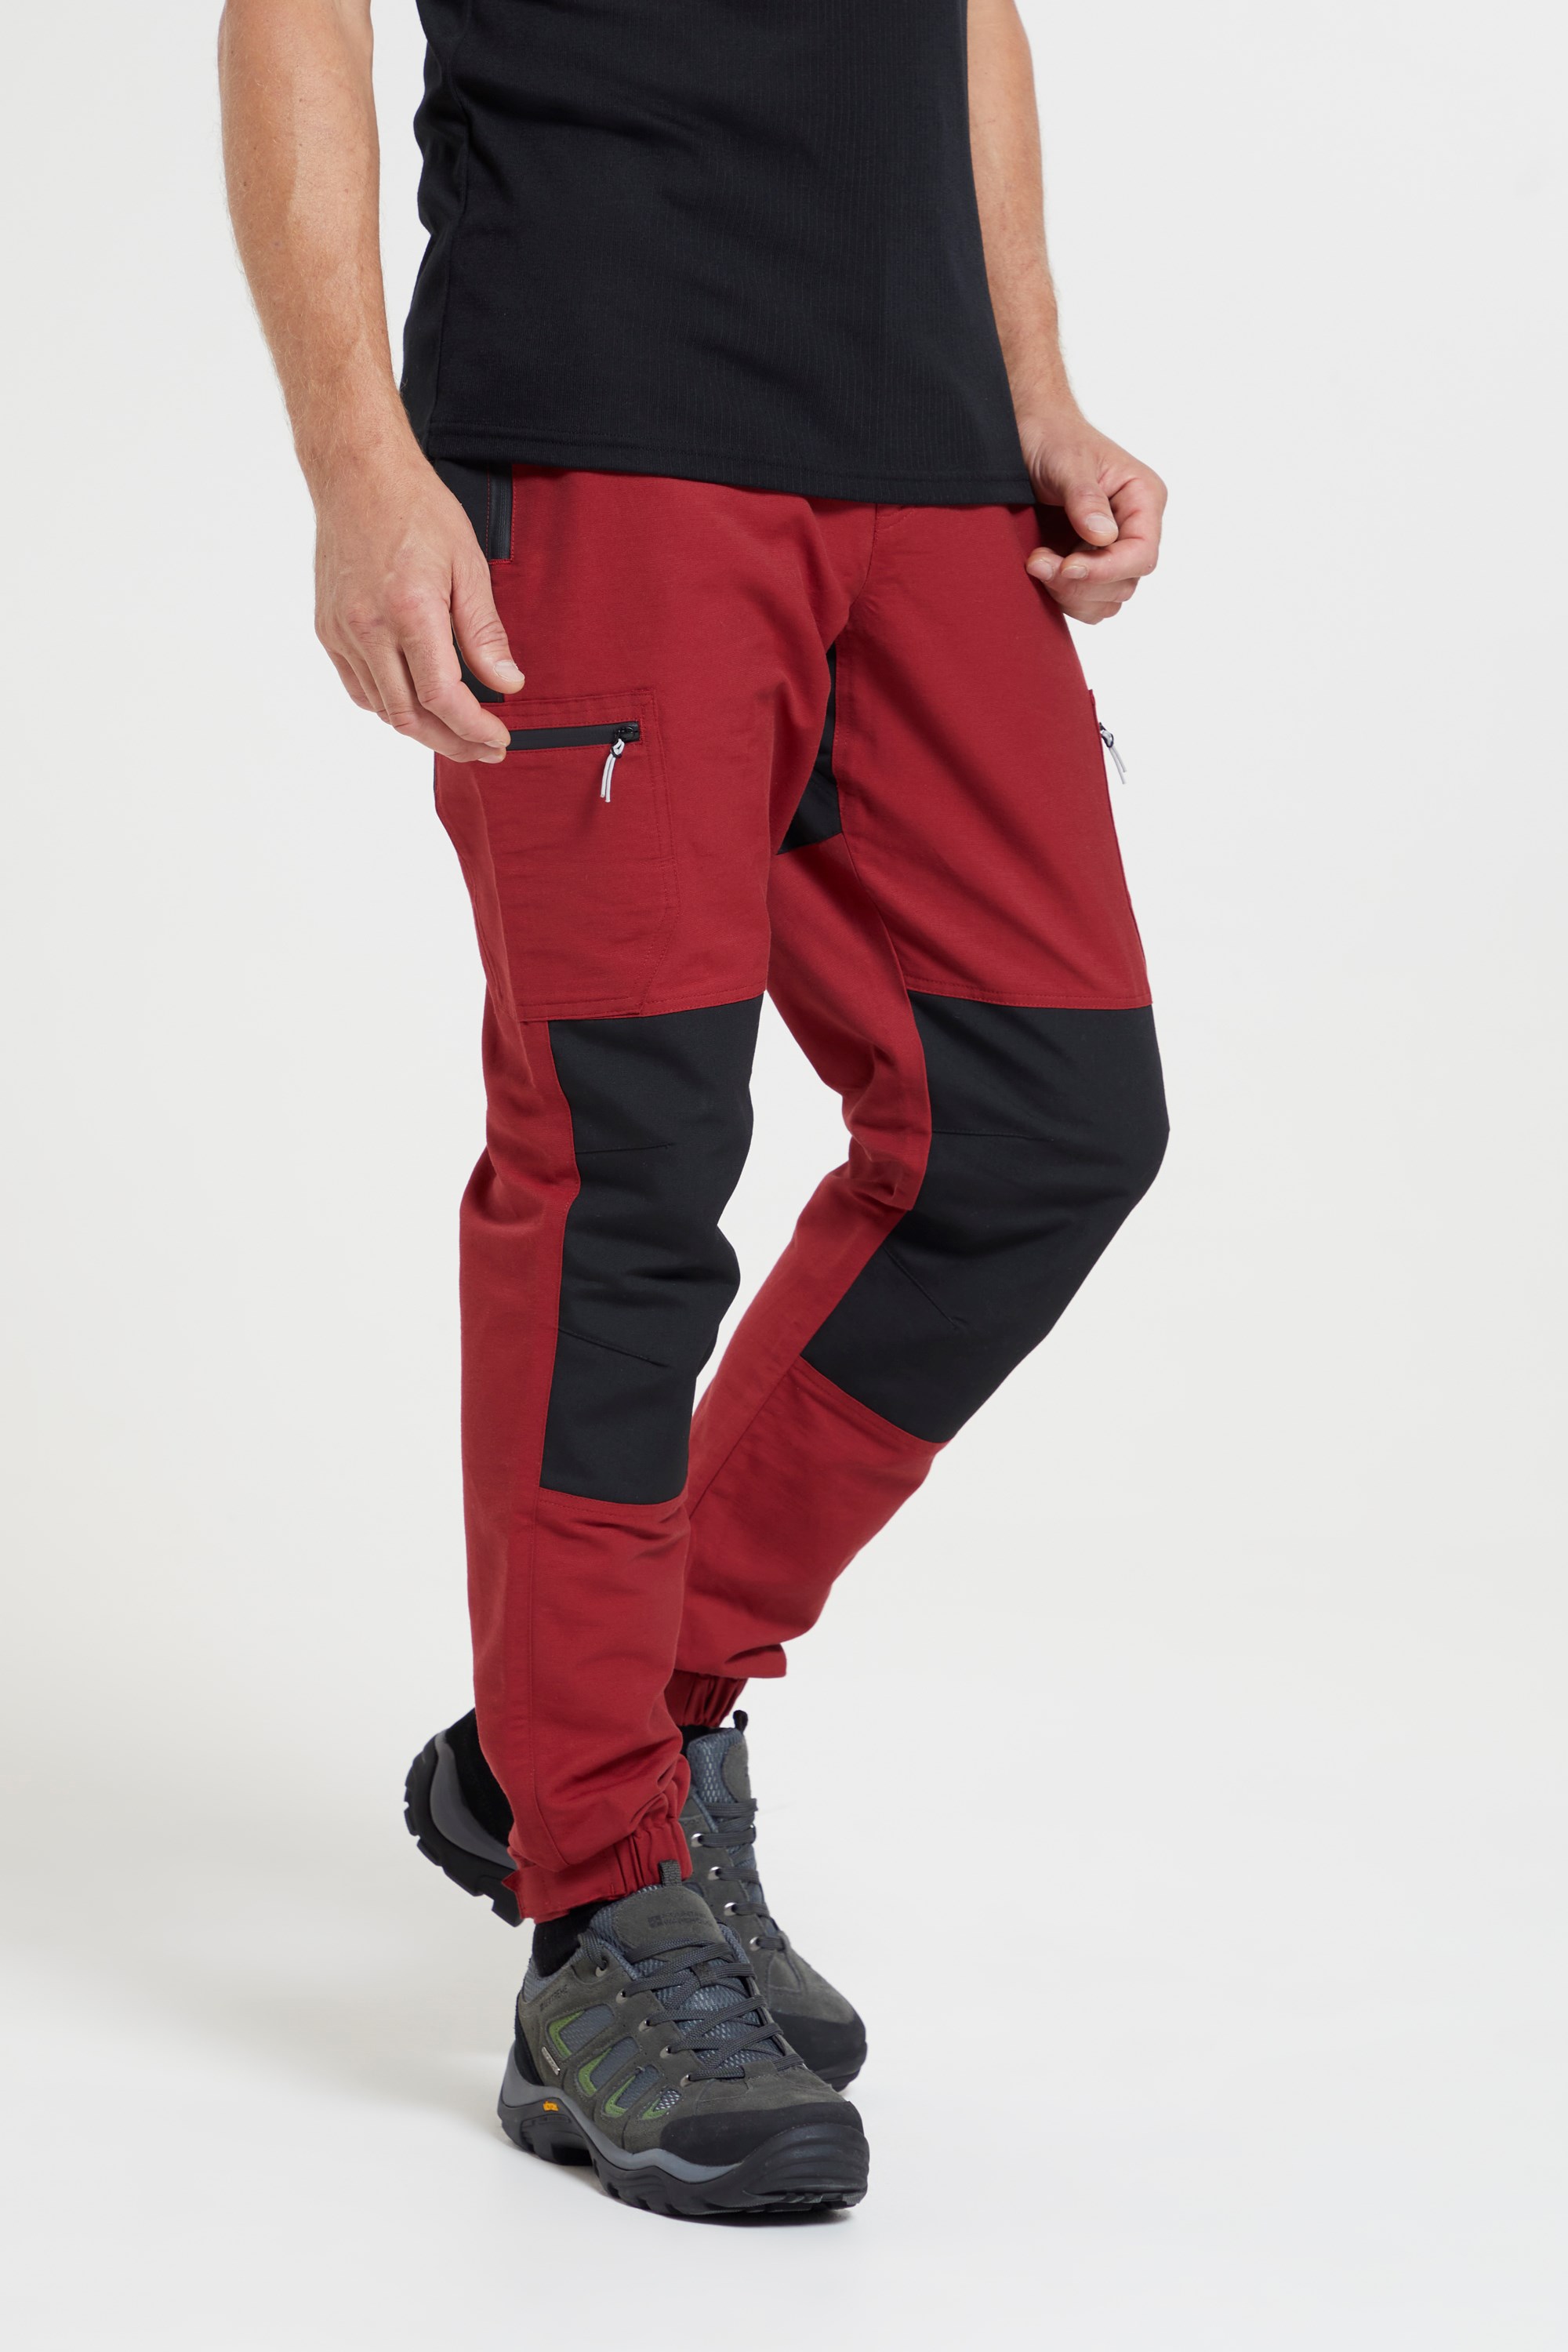 The 9 Best Hiking Pants for Men  Hiking outfit men Best hiking pants  Hiking outfit